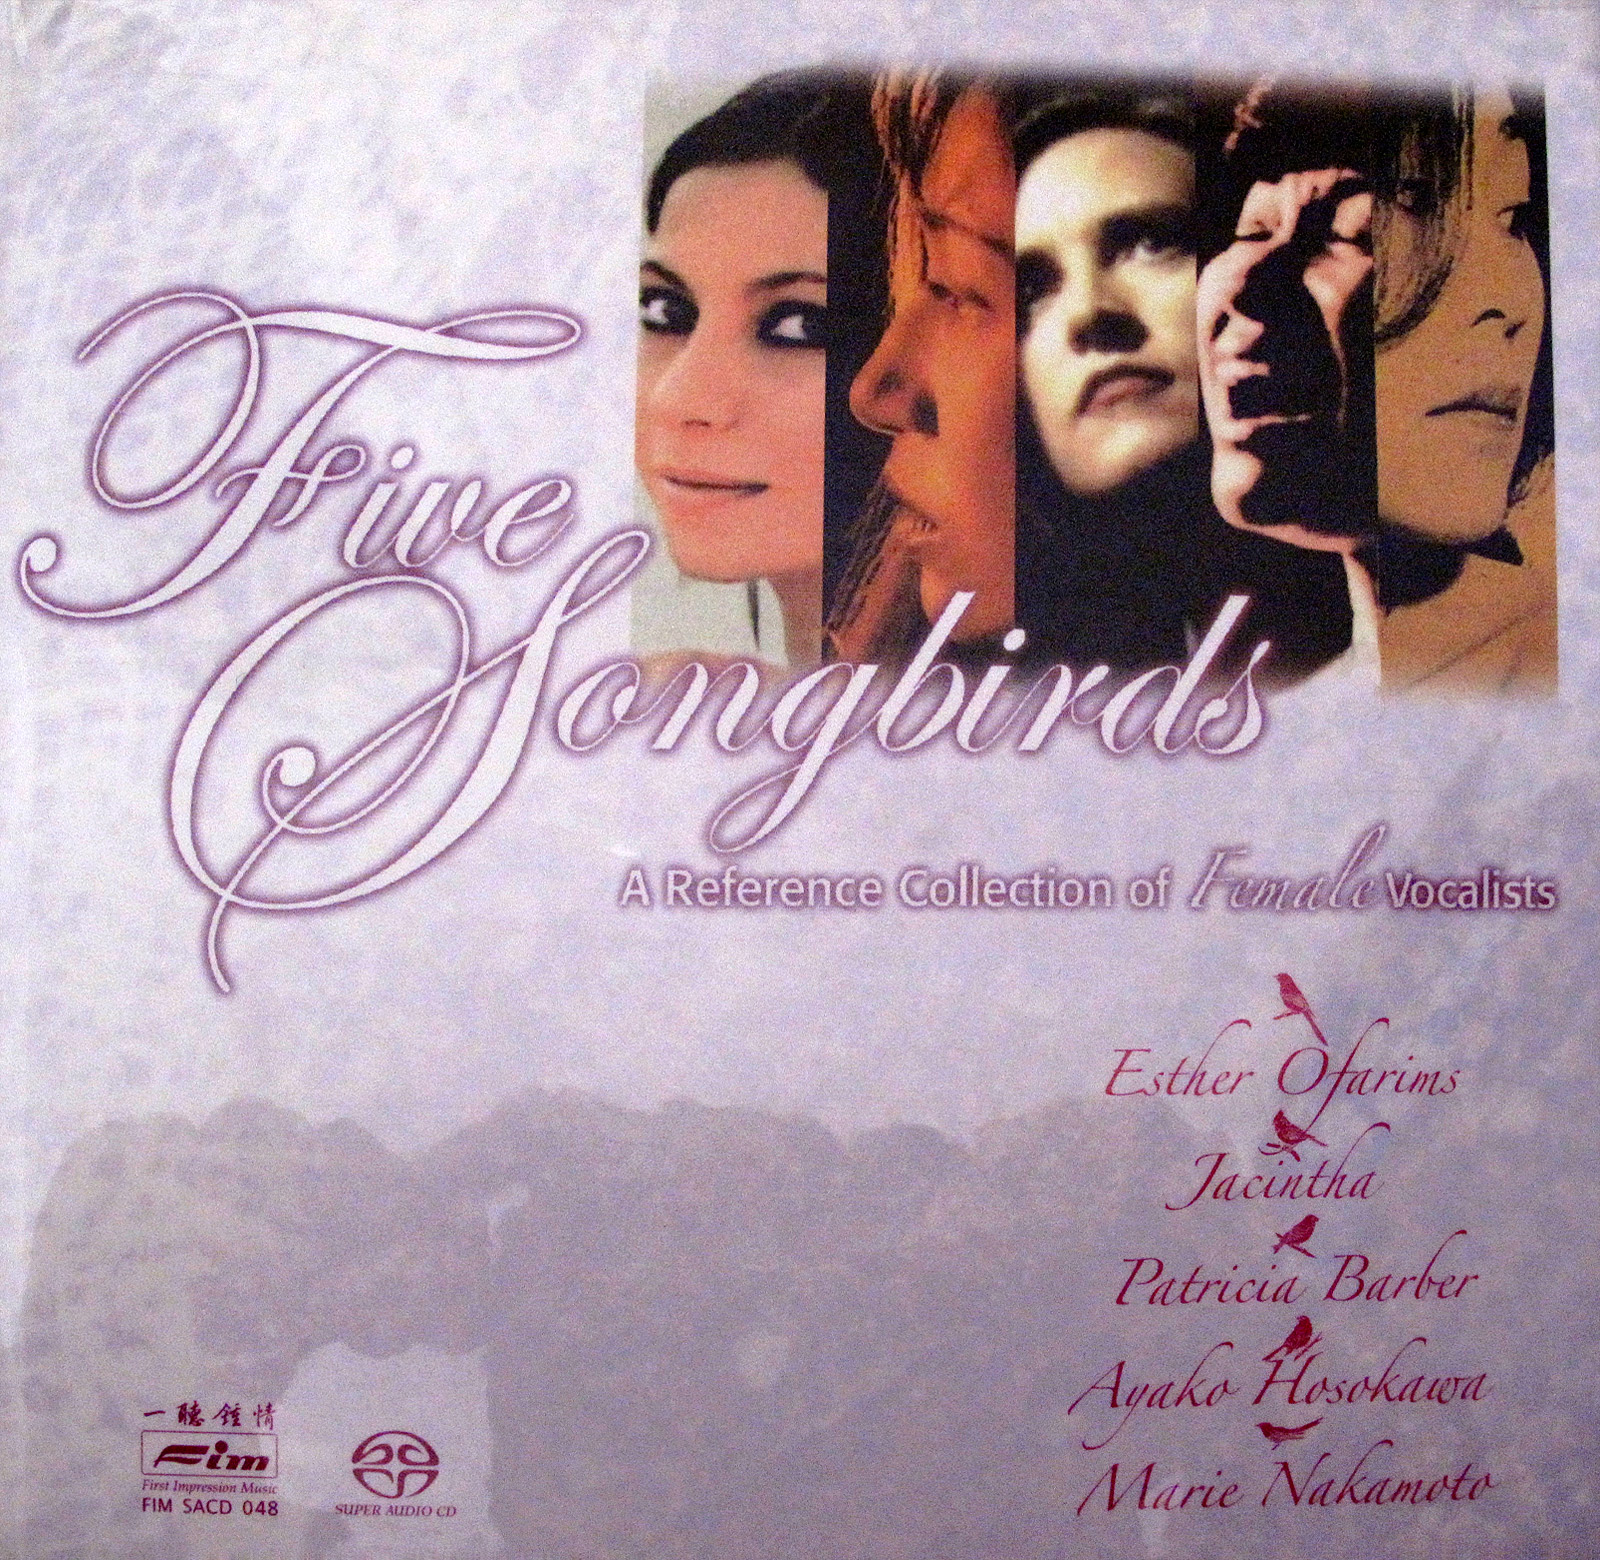 Various Artists - Five Songbirds: A Reference Collection Of Female Vocalists (2004) {SACD ISO + FLAC 24bit/88,2kHz}